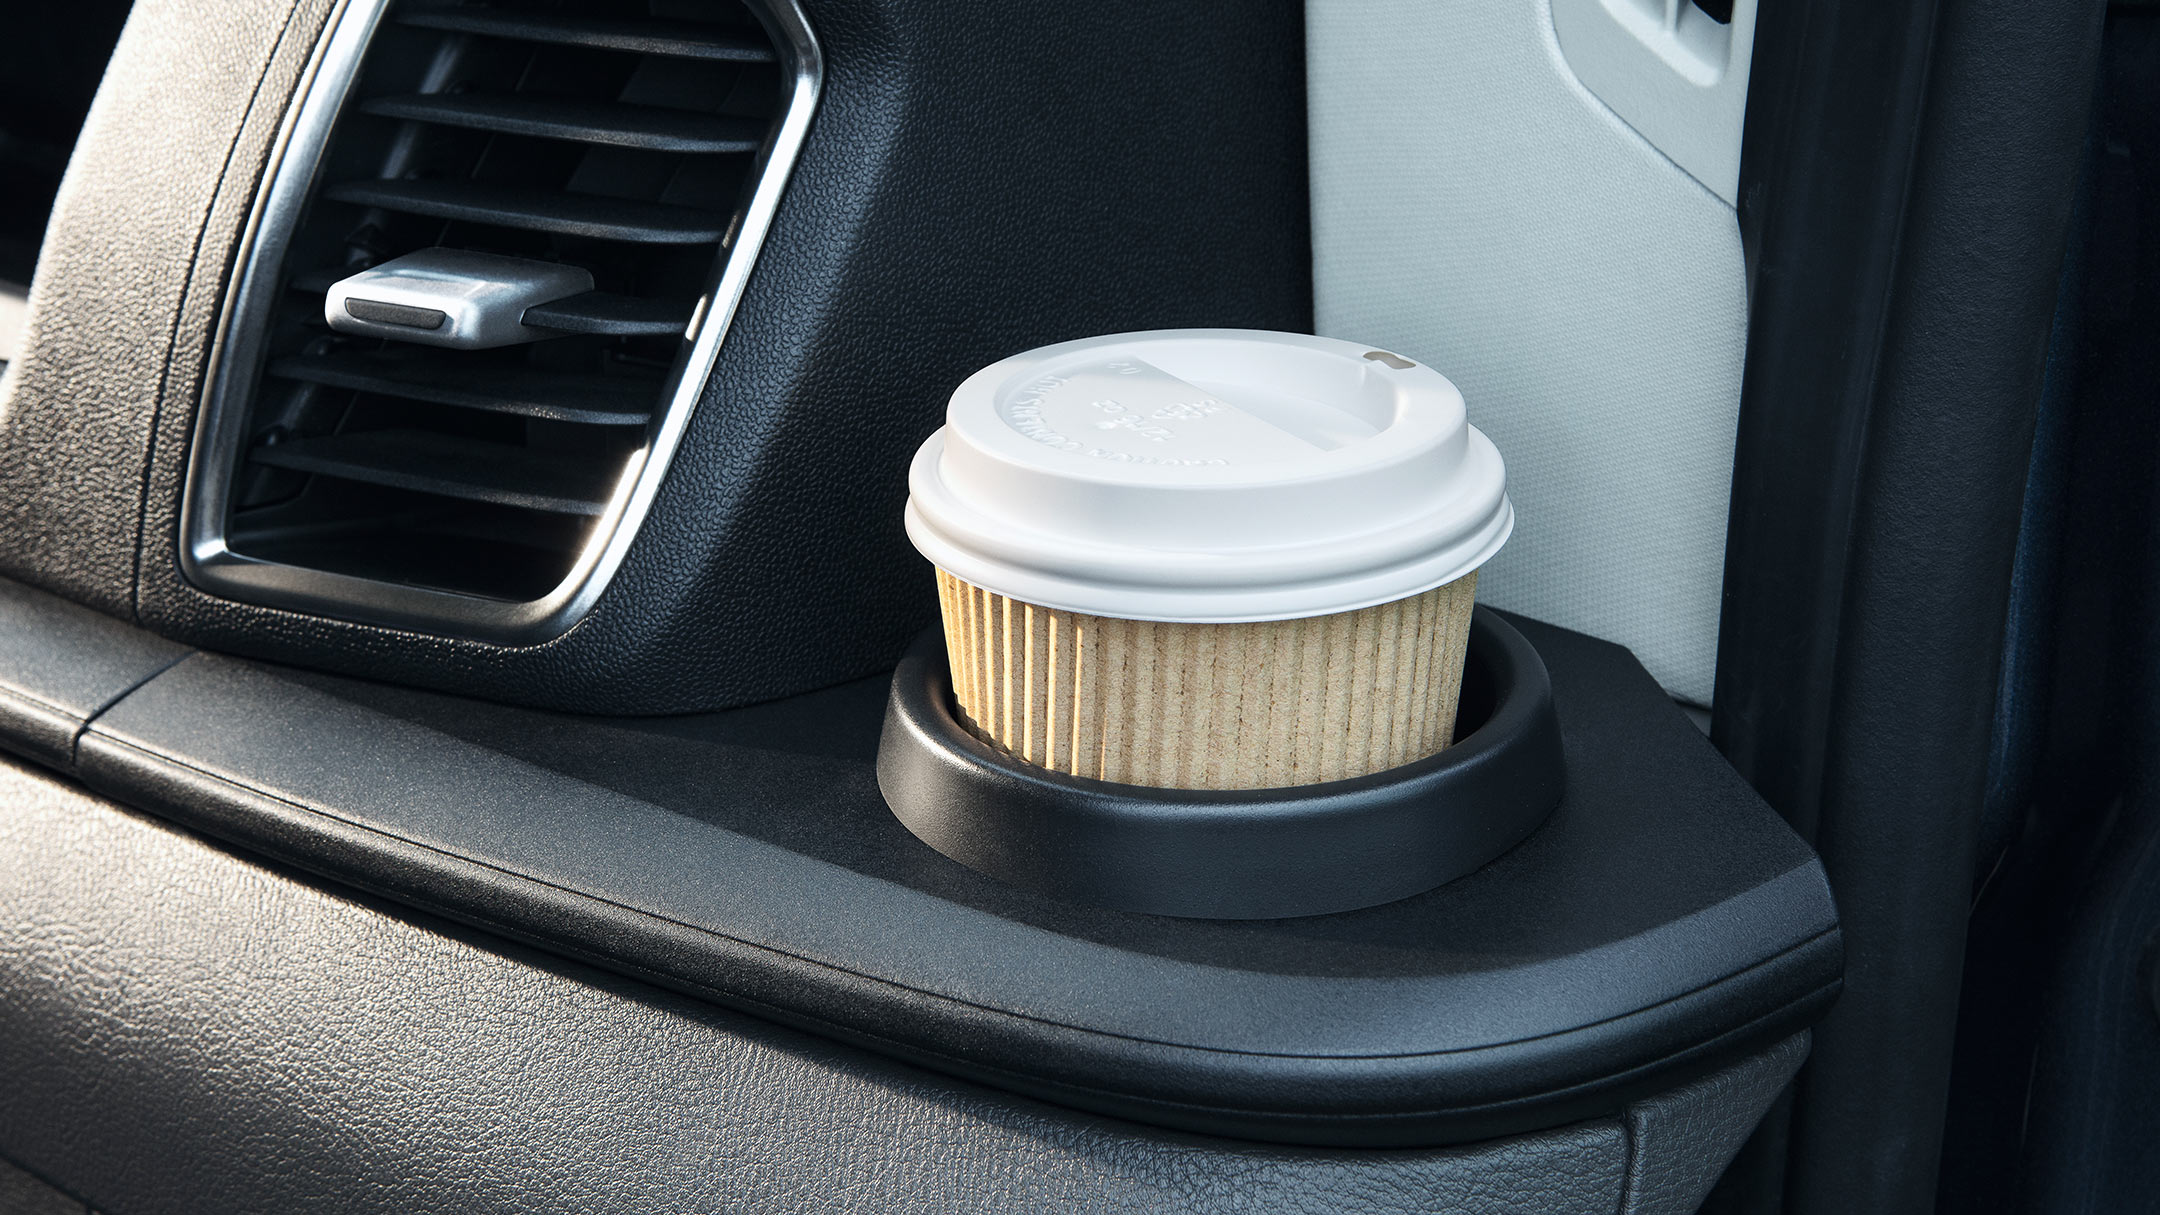 New Ford Transit Minibus interior showing coffee cup and stowage space